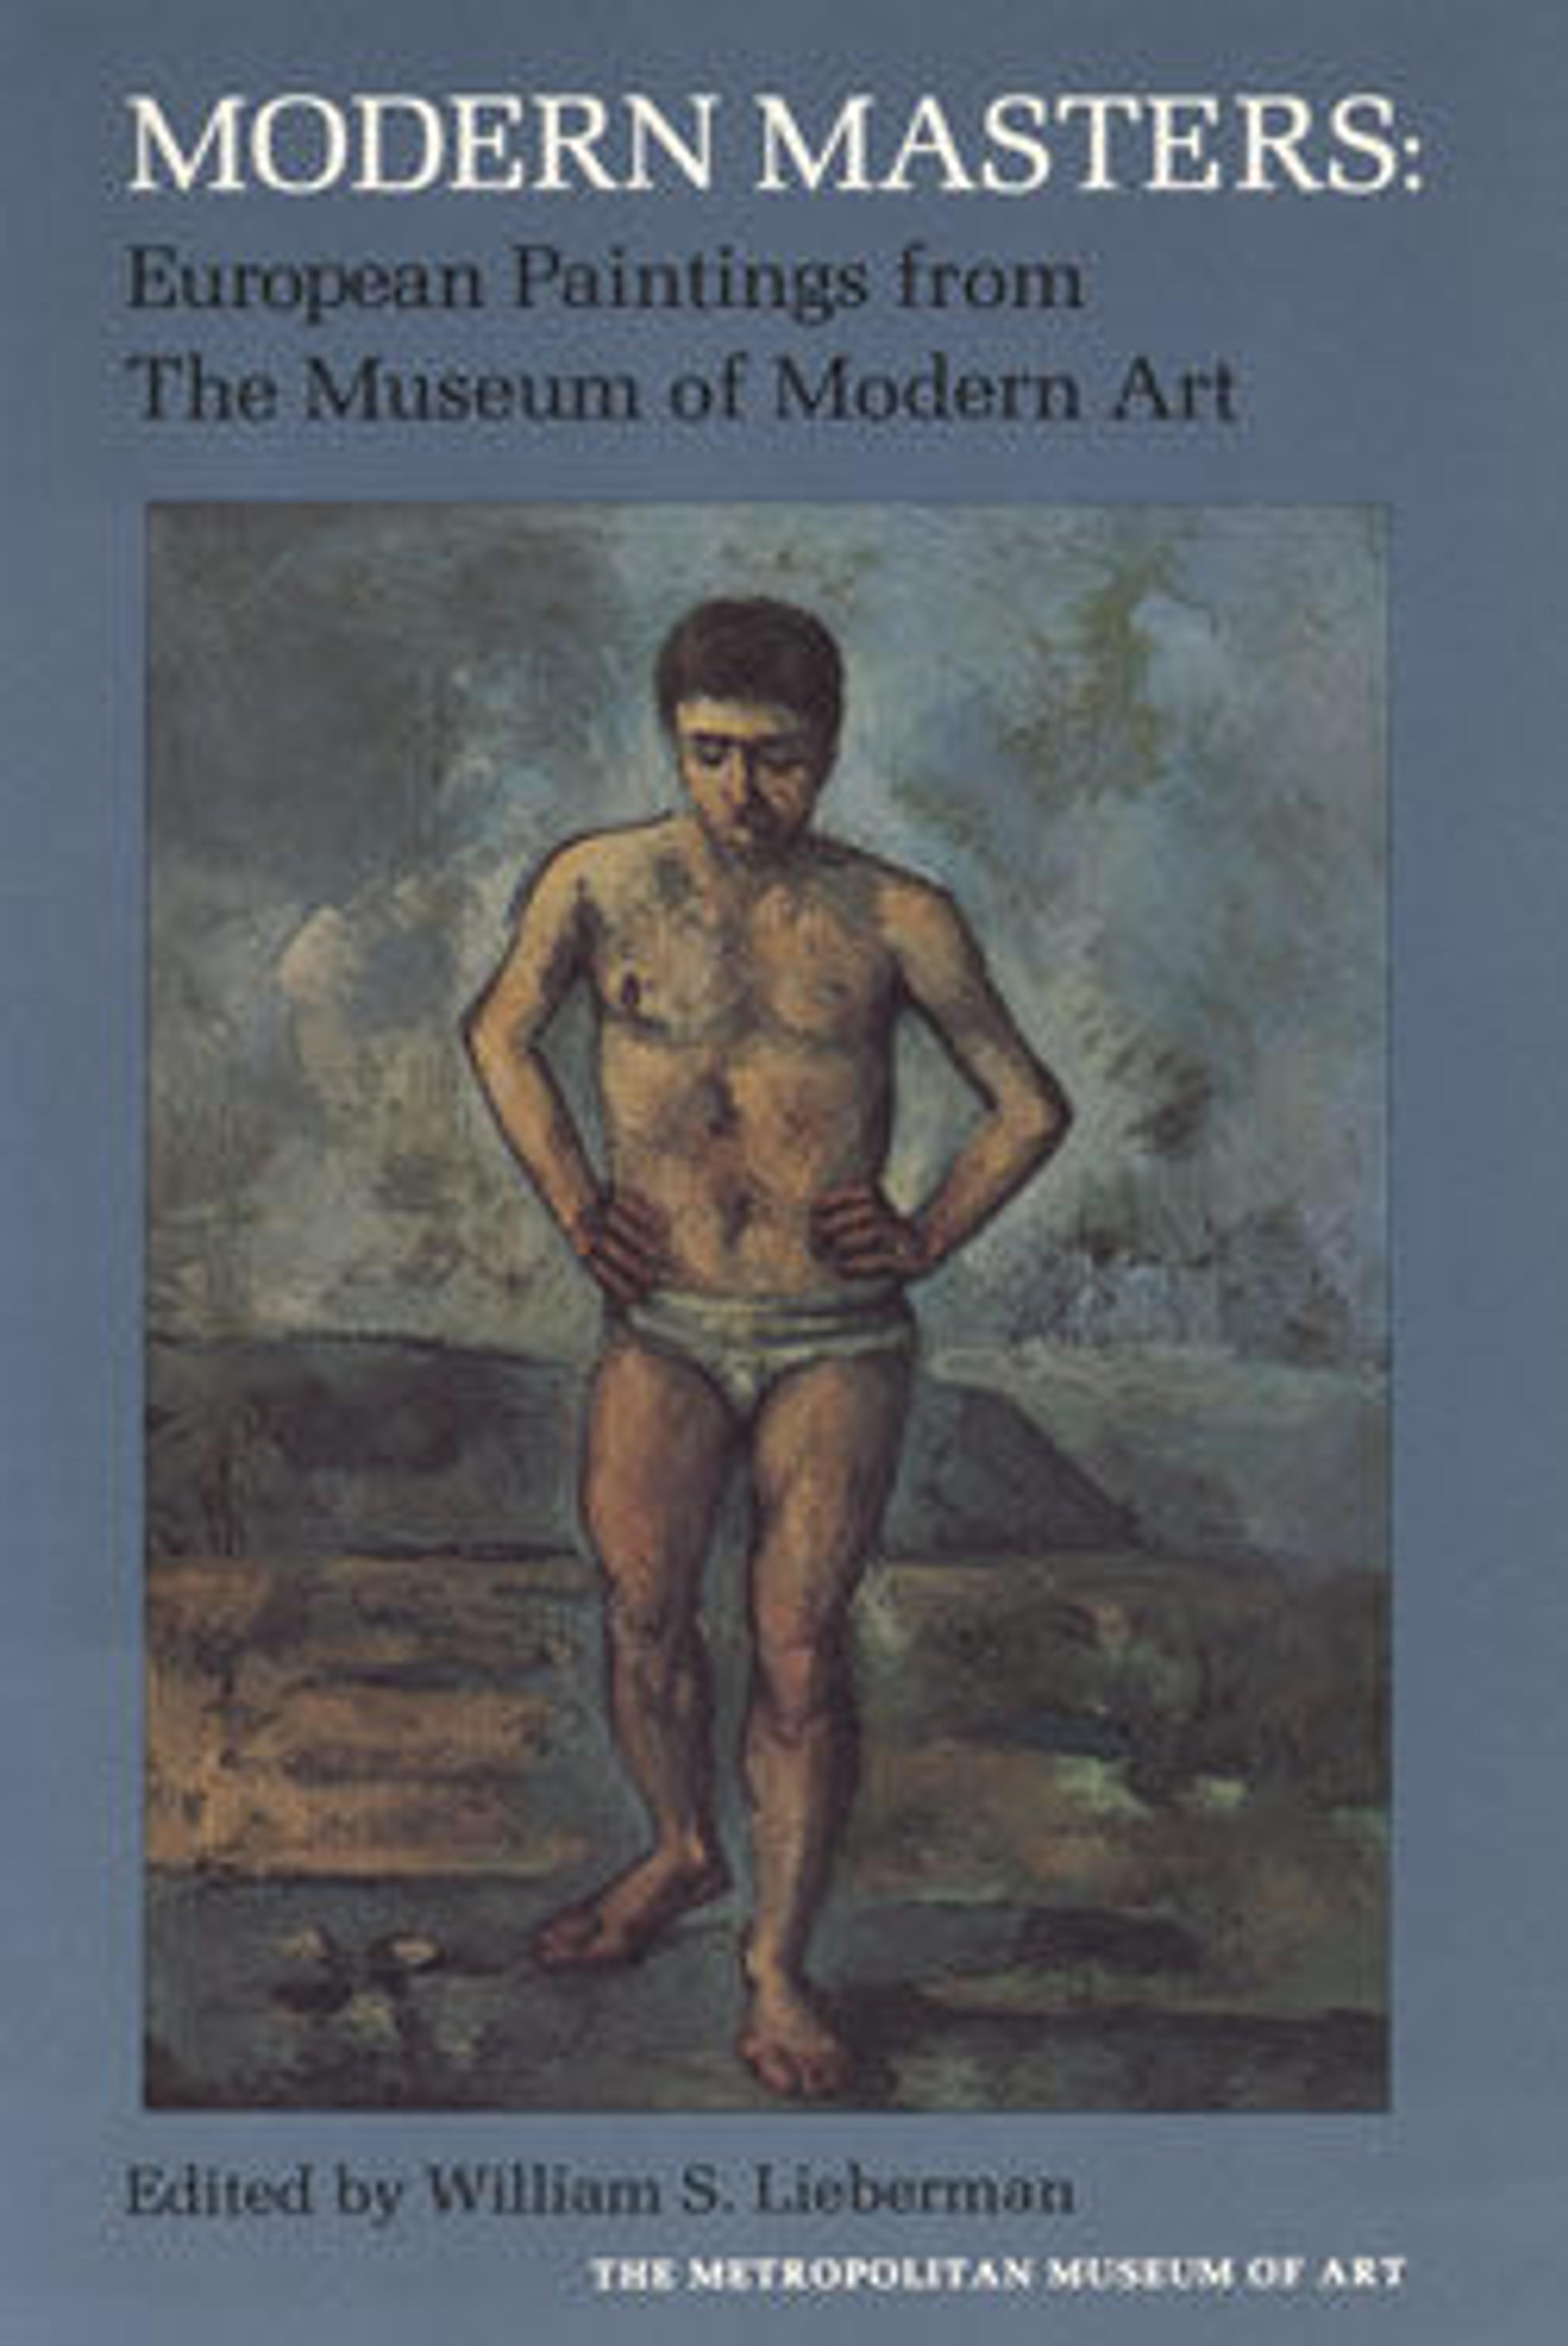 Modern Masters: European Paintings from The Museum of Modern Art